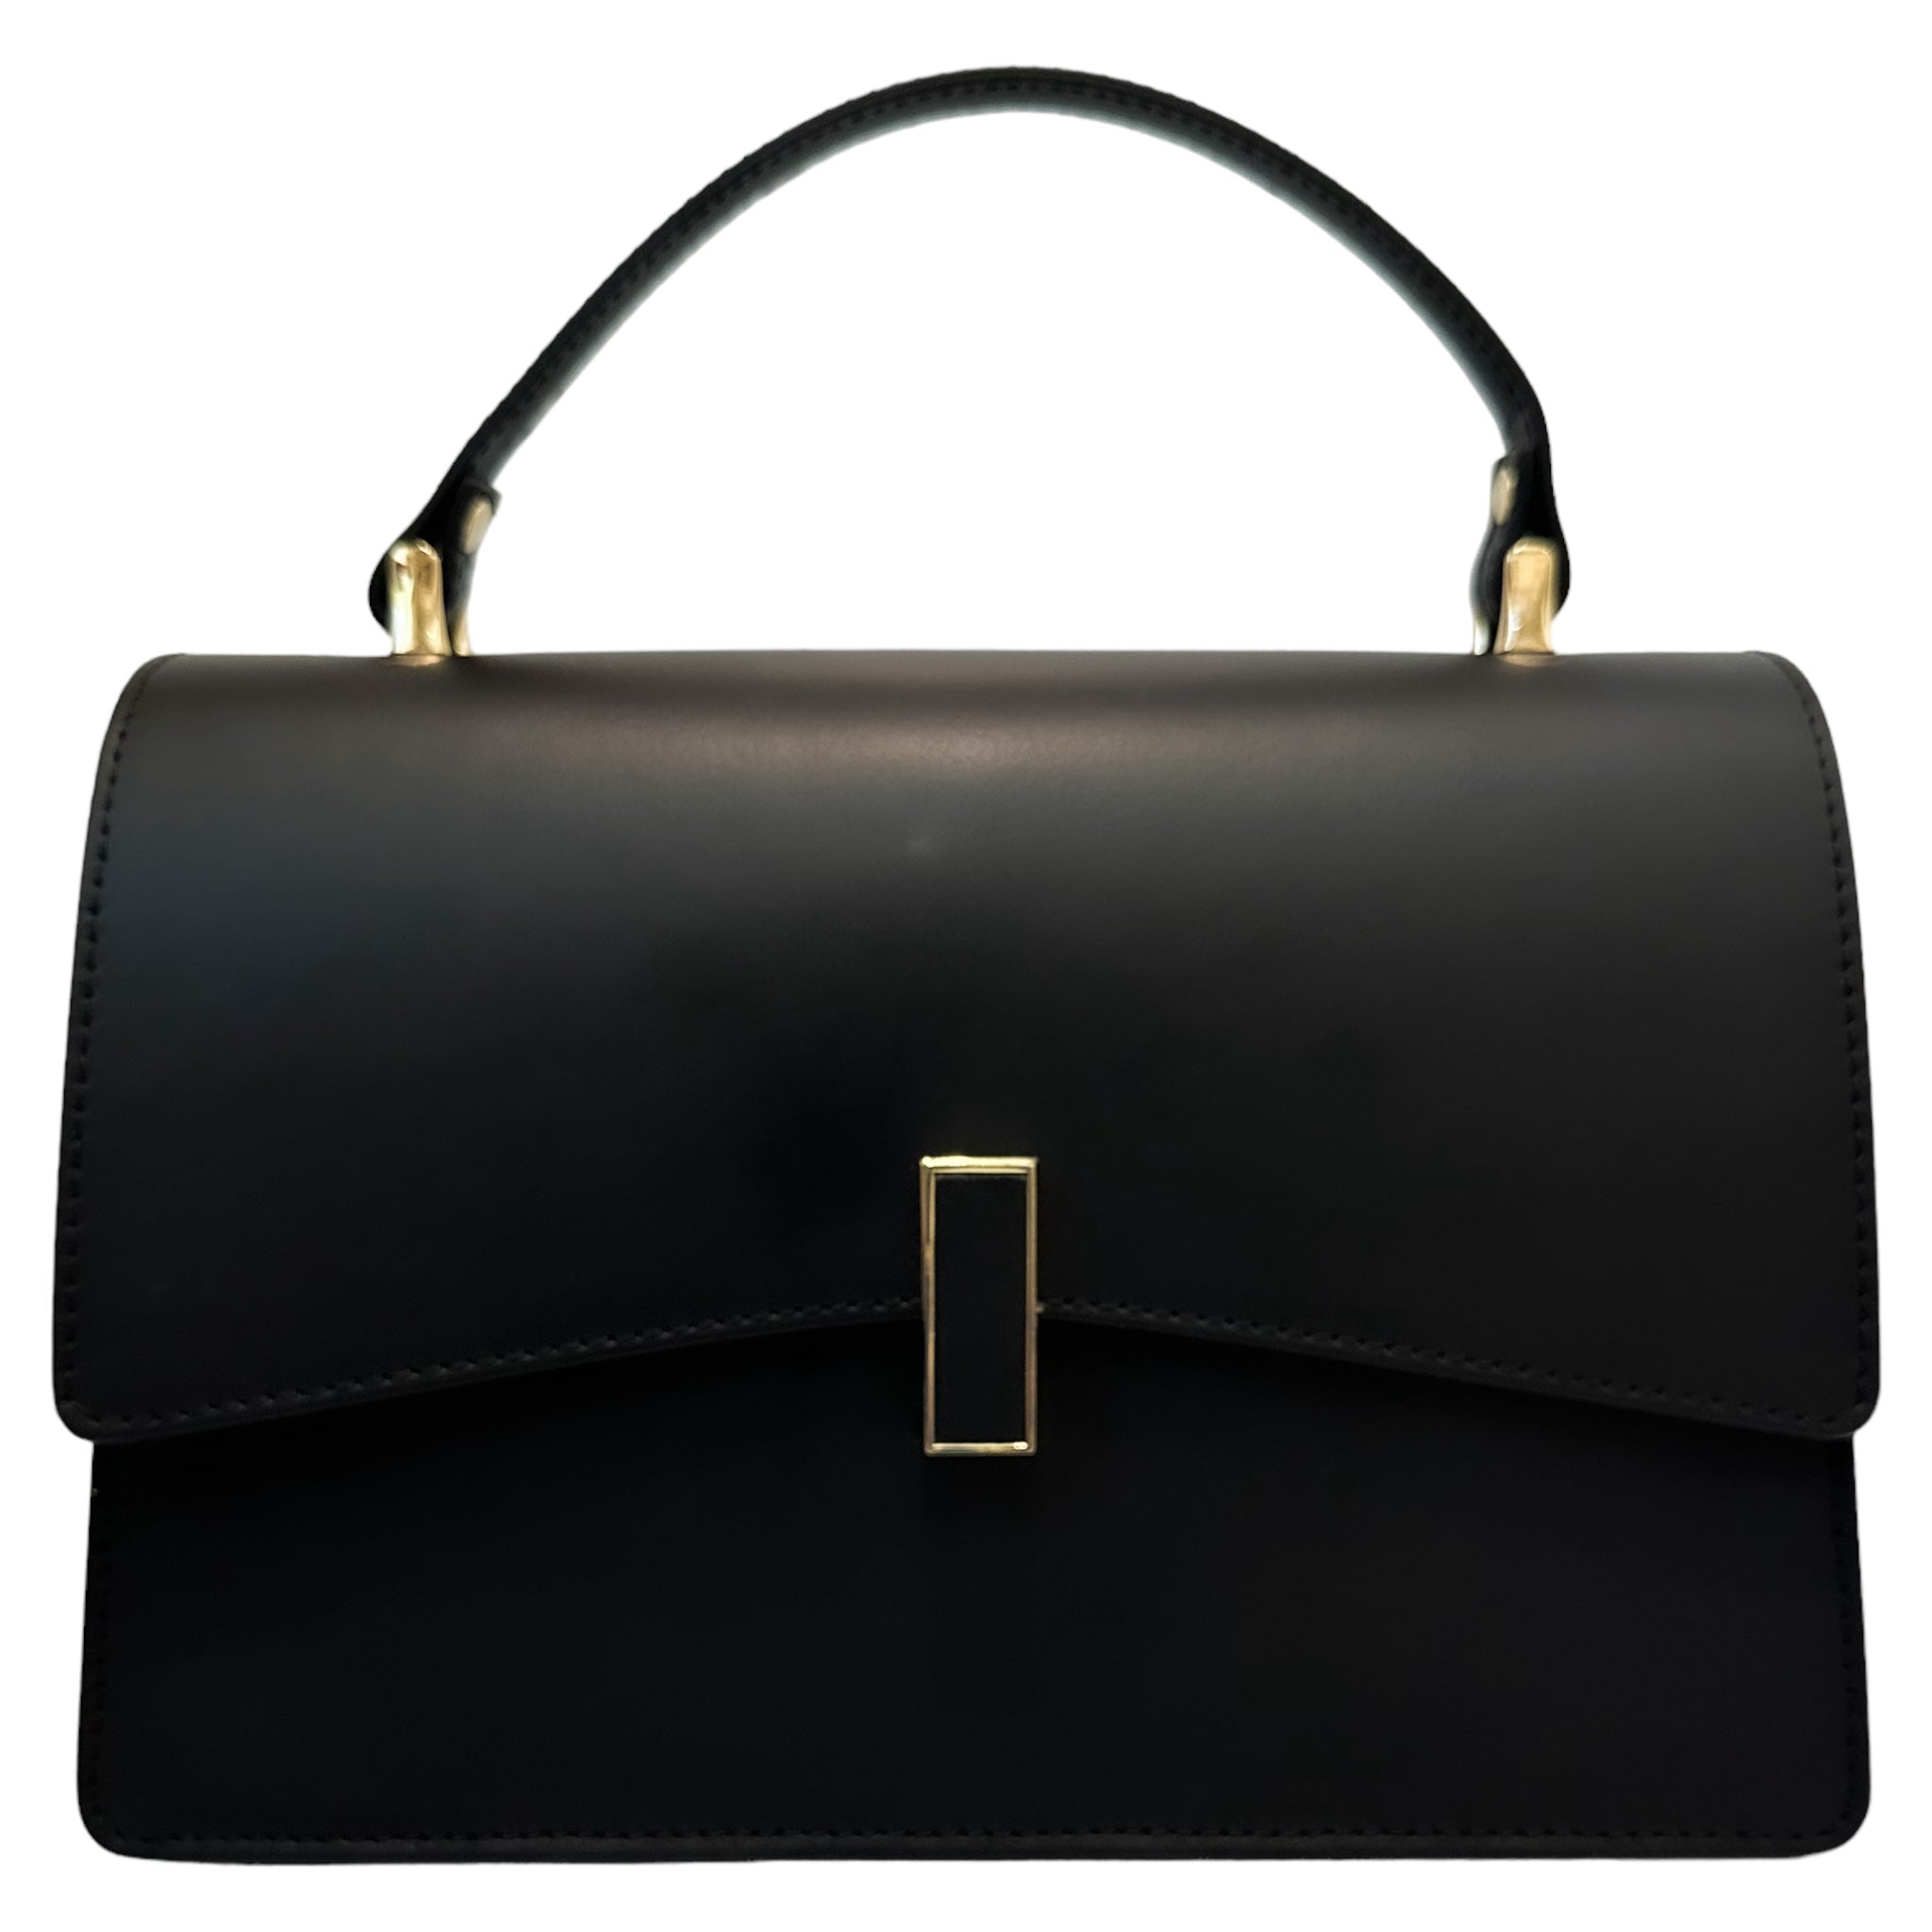 The NORA Top Handle Bag